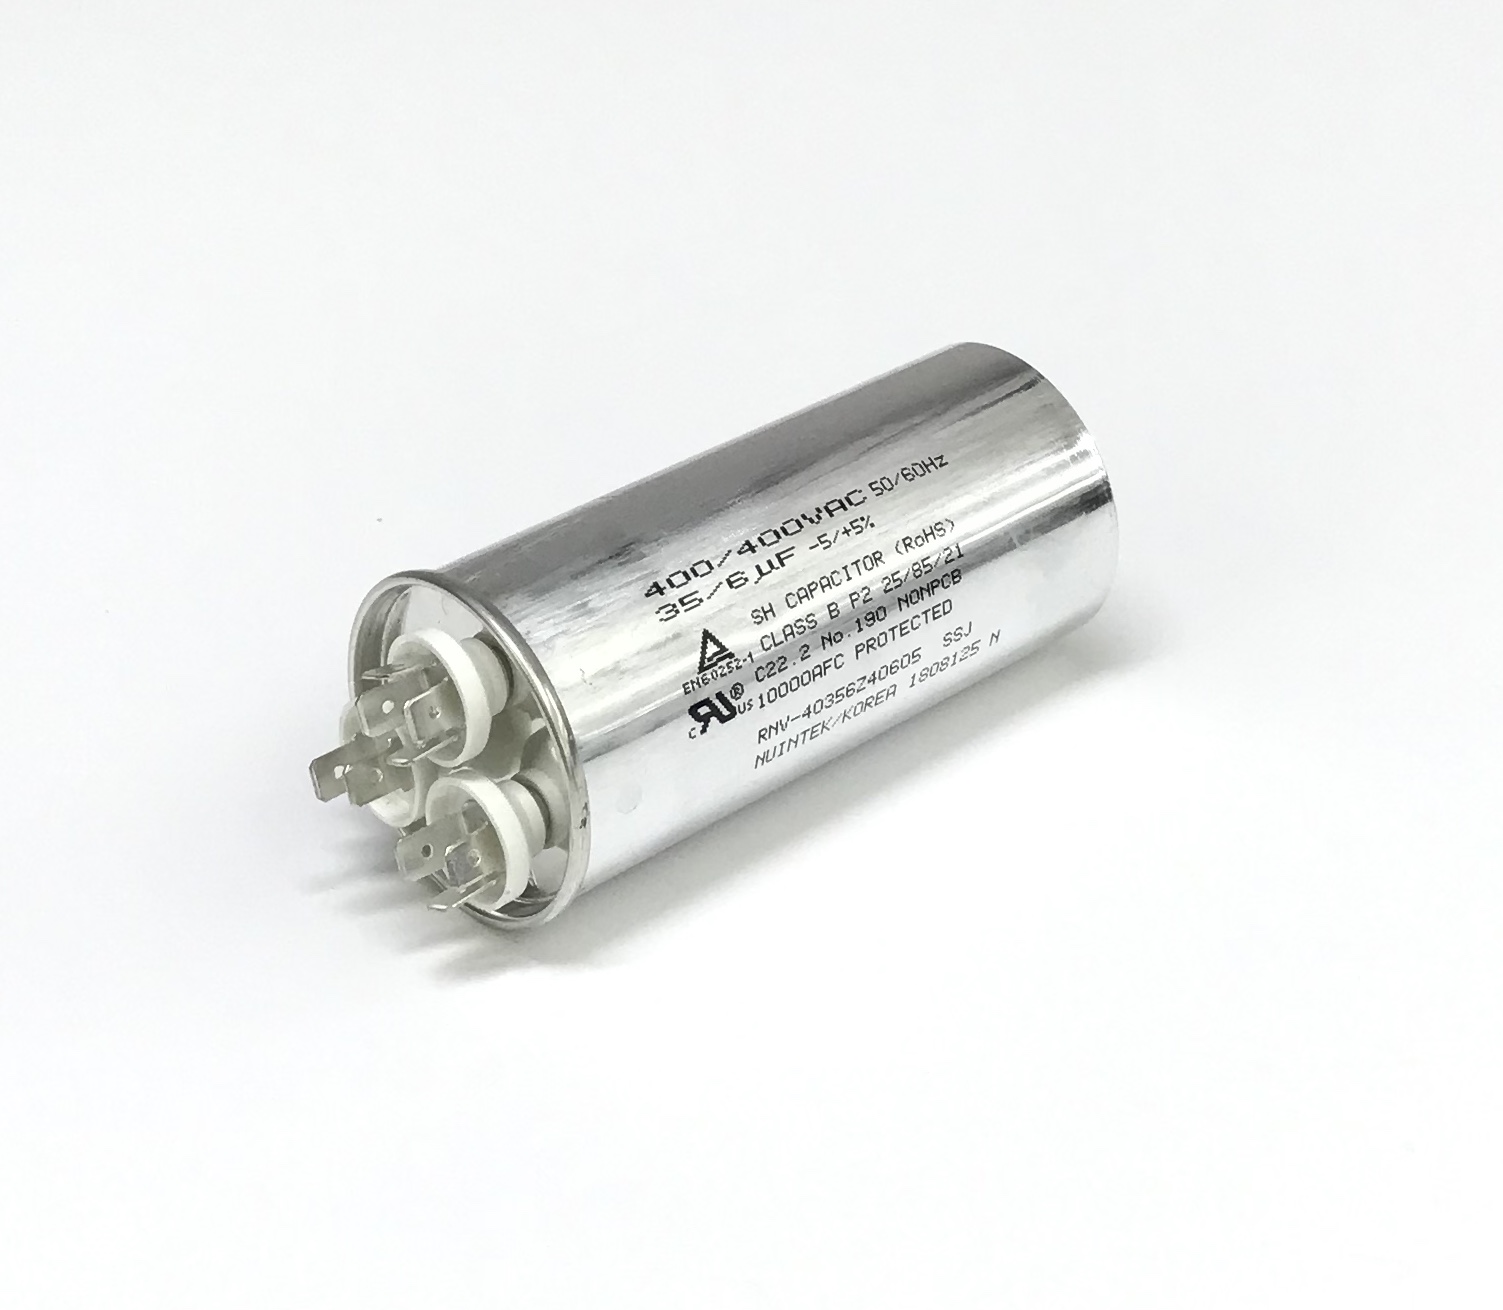 LG OEM LG Air Conditioner AC Capacitor Shipped With LT103CER, LT103HNR, LW1800ERZ3